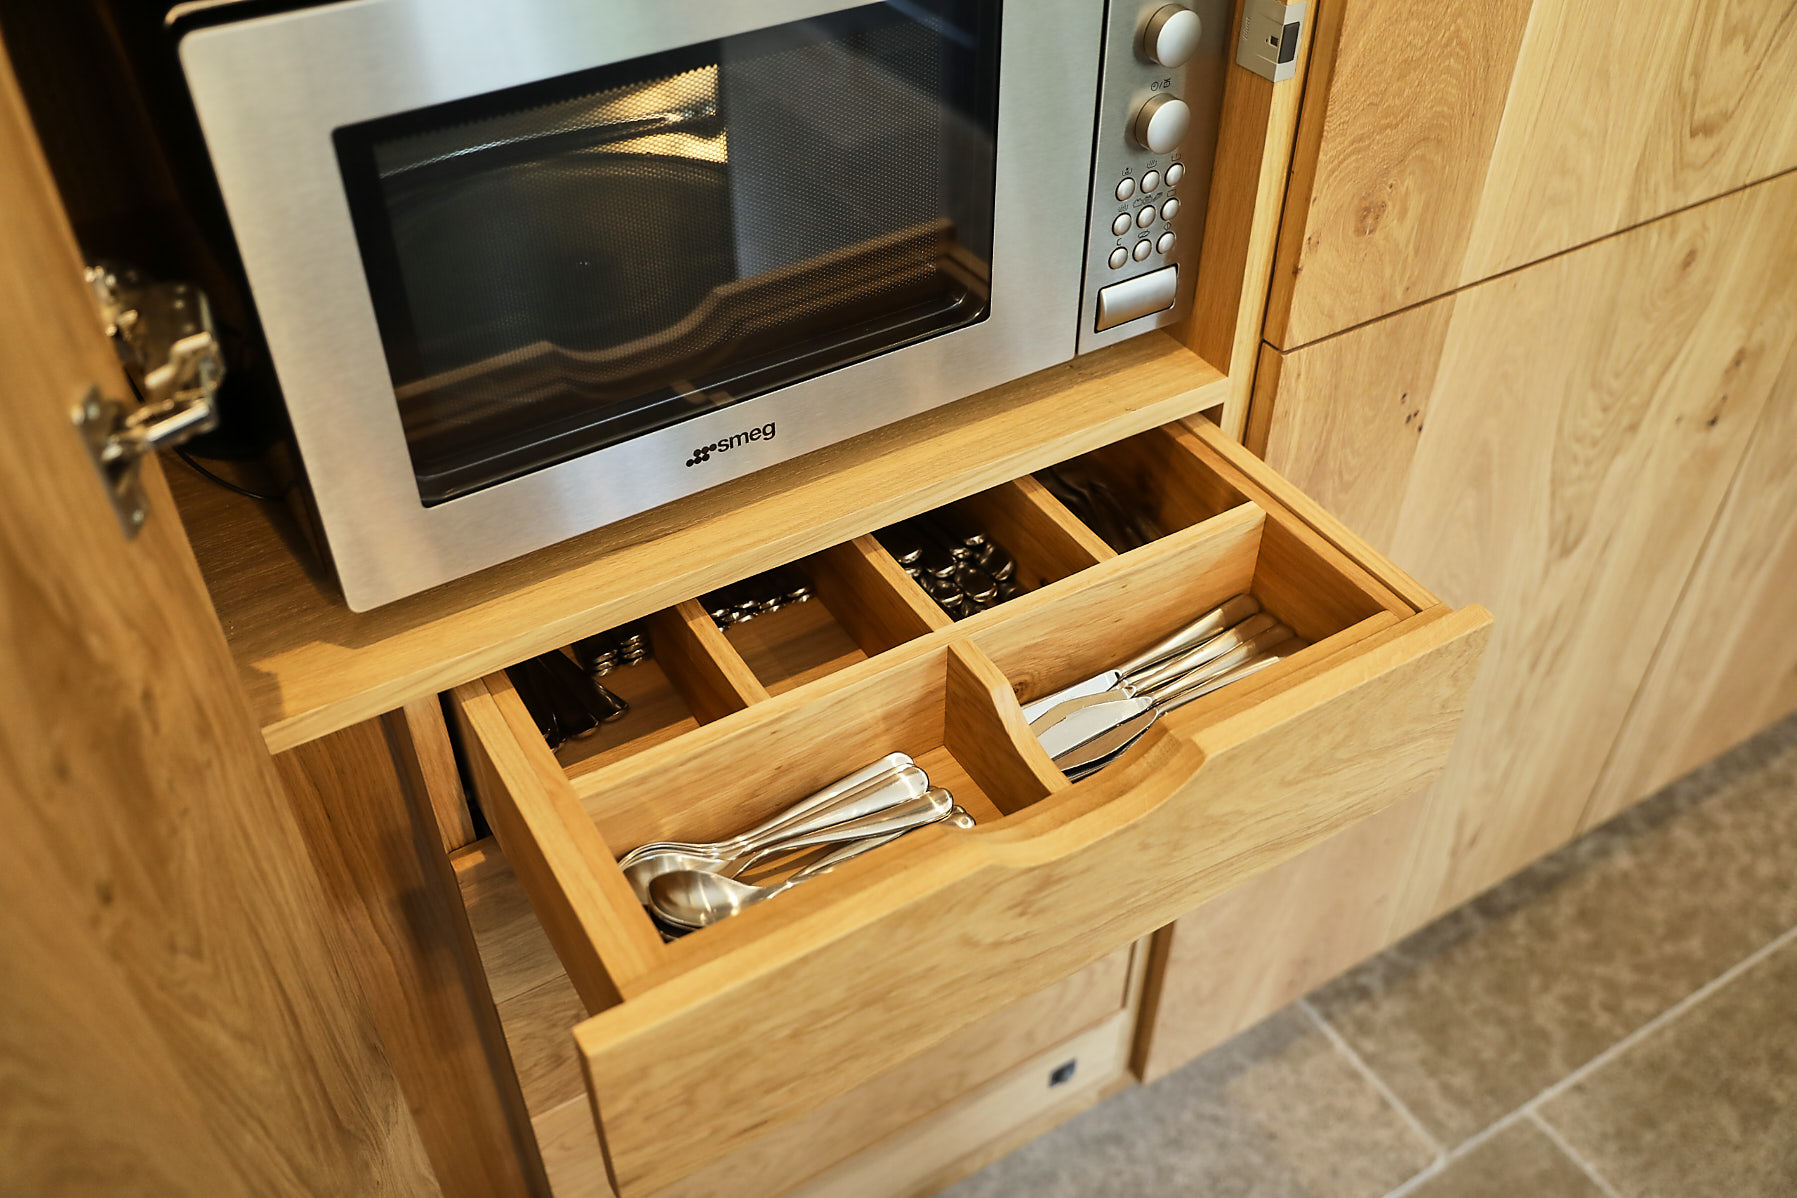 Solid oak cutlery insert in tall kitchen cabinets separates knives and spoons